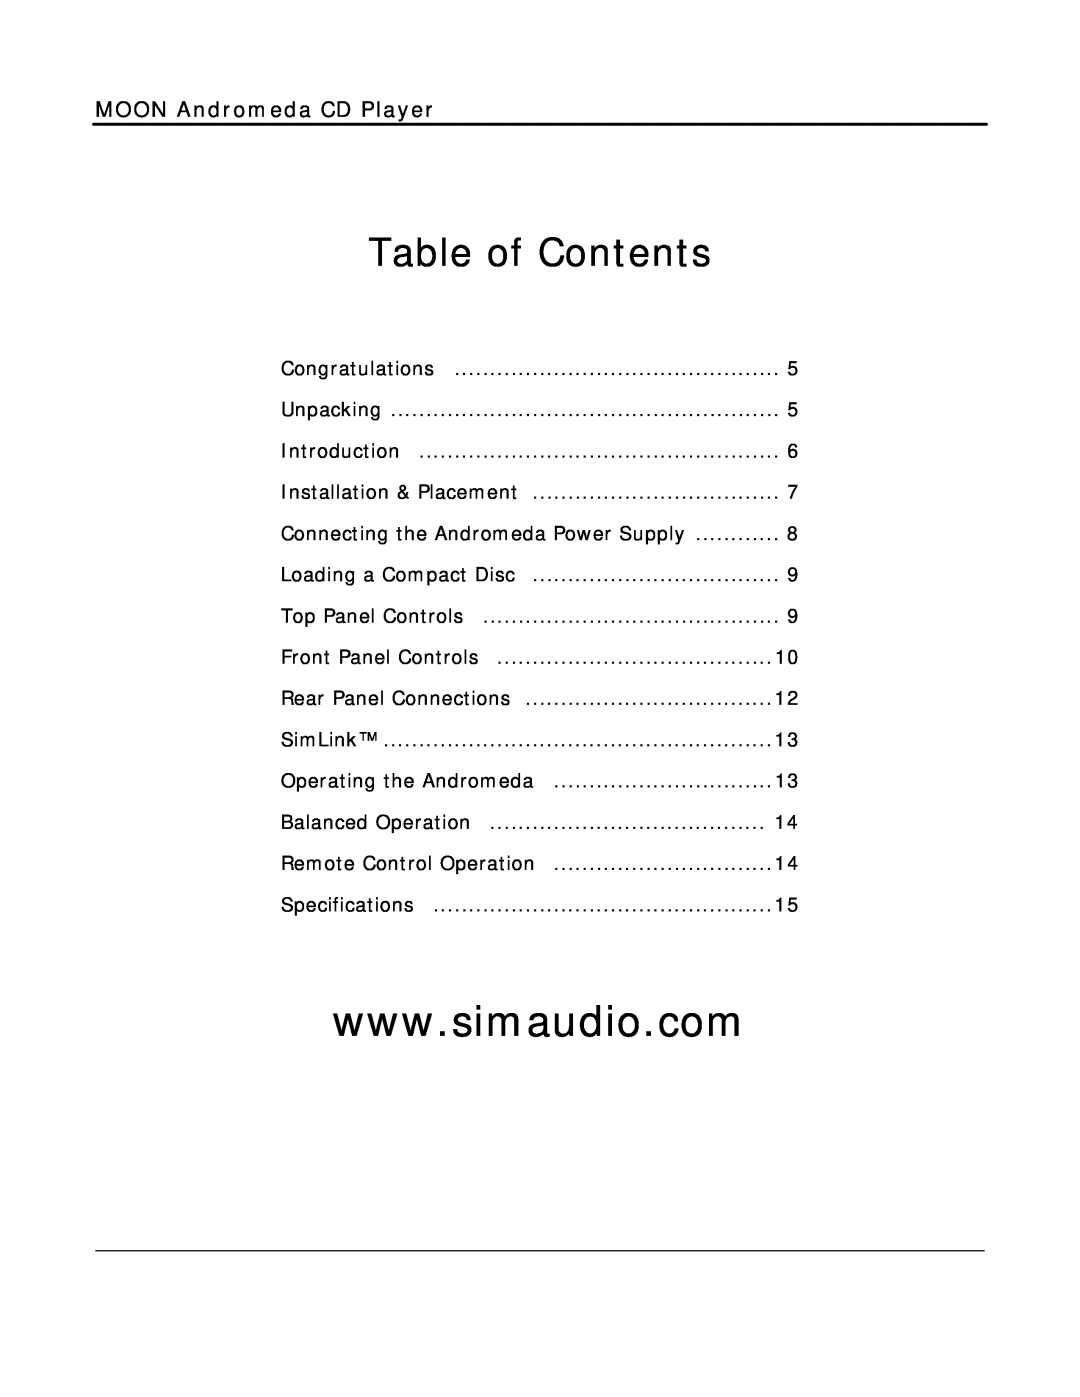 Simaudio MOON Evolution Series owner manual Table of Contents, MOON Andromeda CD Player 